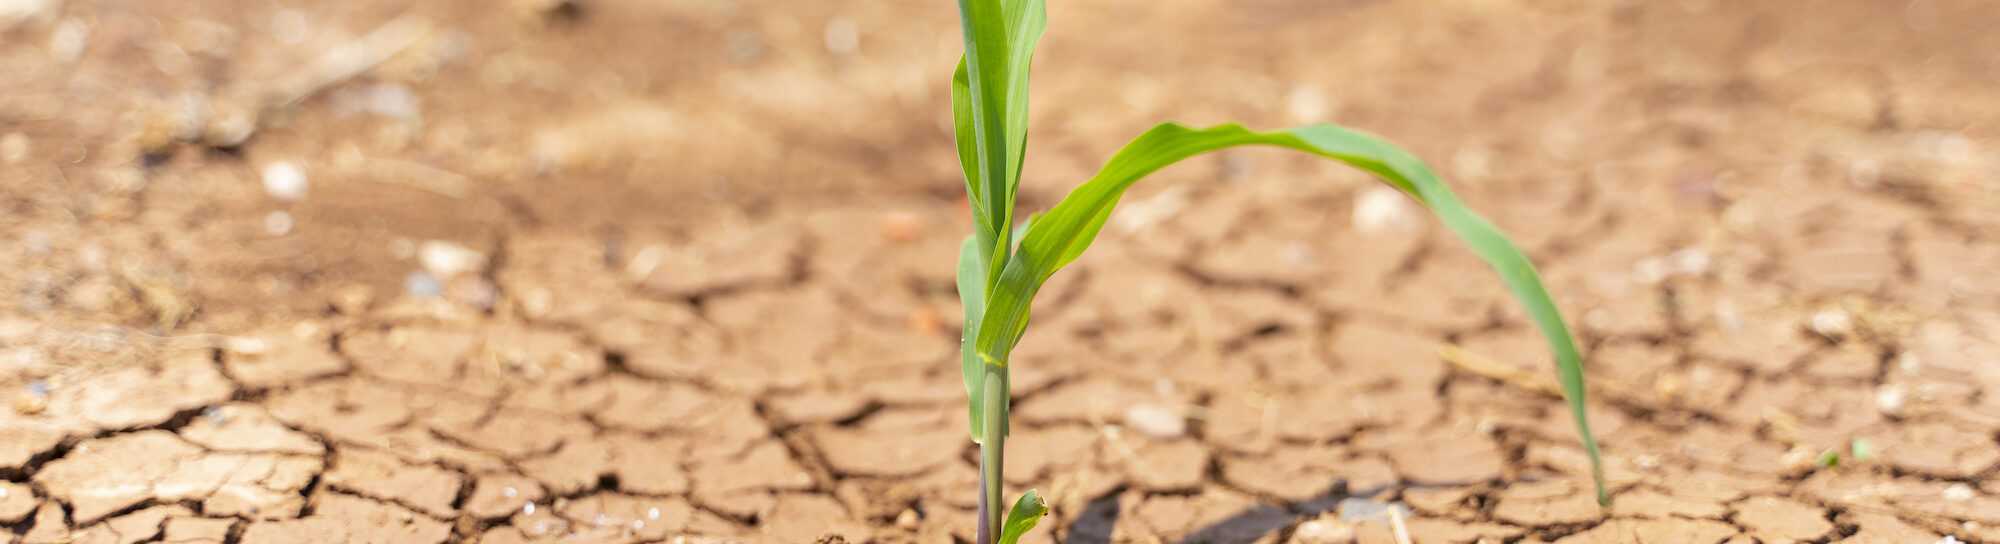 Drought-tolerant maize as a response to climate change